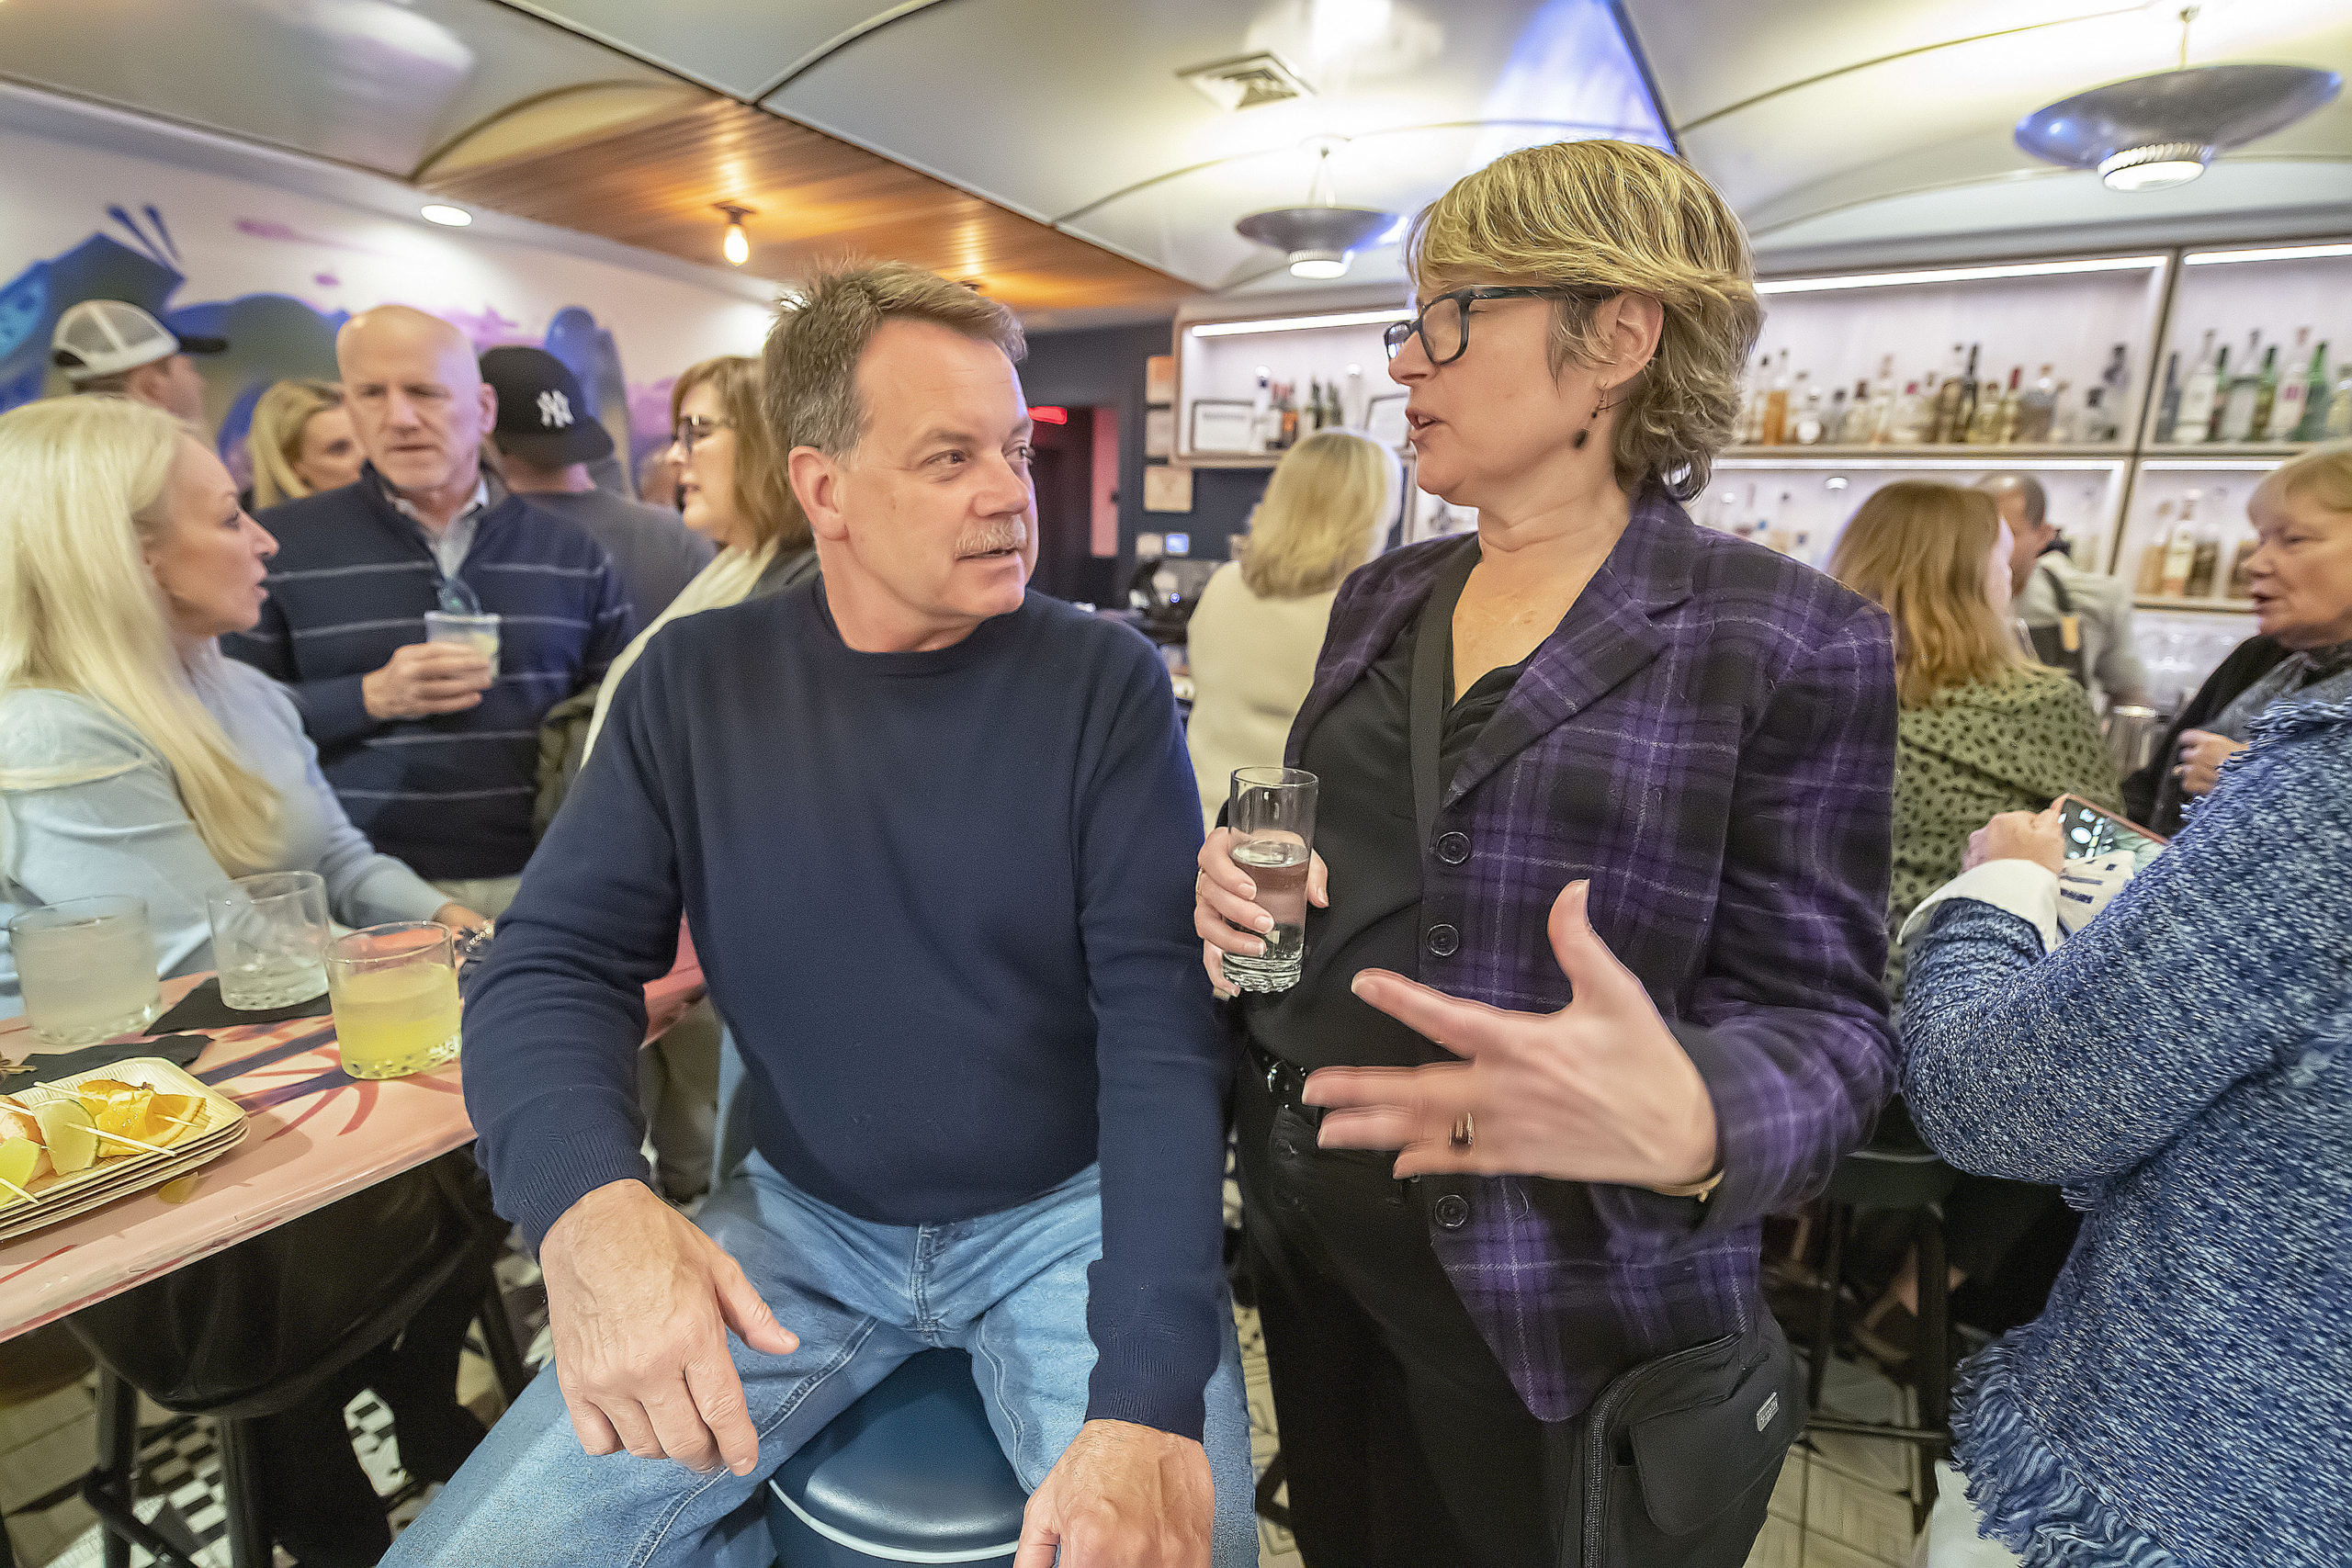 East Hampton Village Mayor Jerry Larsen chats with Town Council candidate Kathee Burke-Gonzalez at the Democratic post-election gathering at the Coche Comidor restaurant in Amagansett on Tuesday night.  MICHAEL HELLER